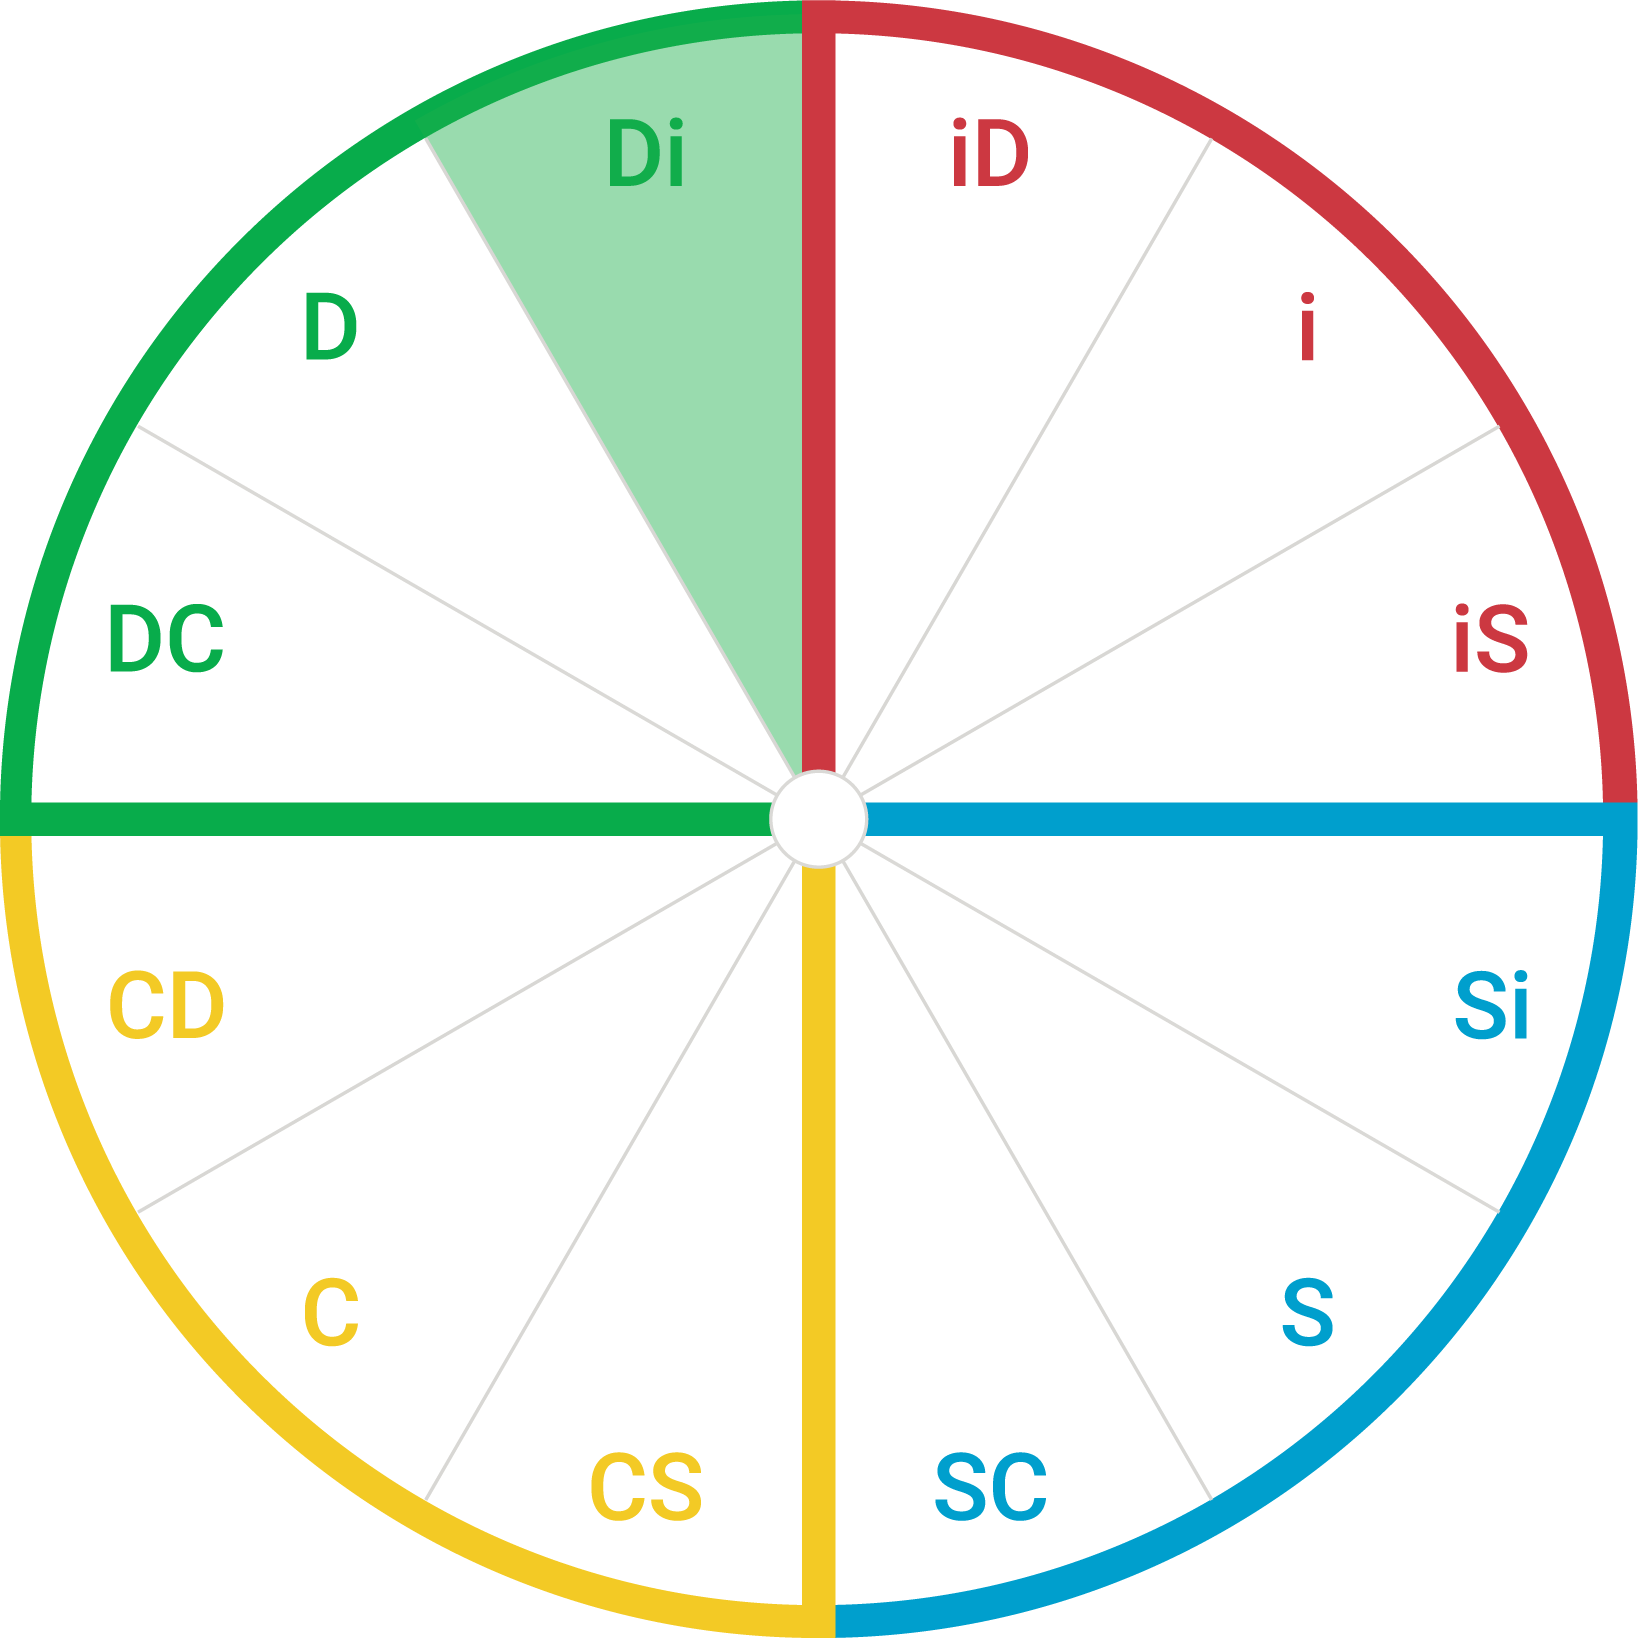 DiSC map showing the Di style